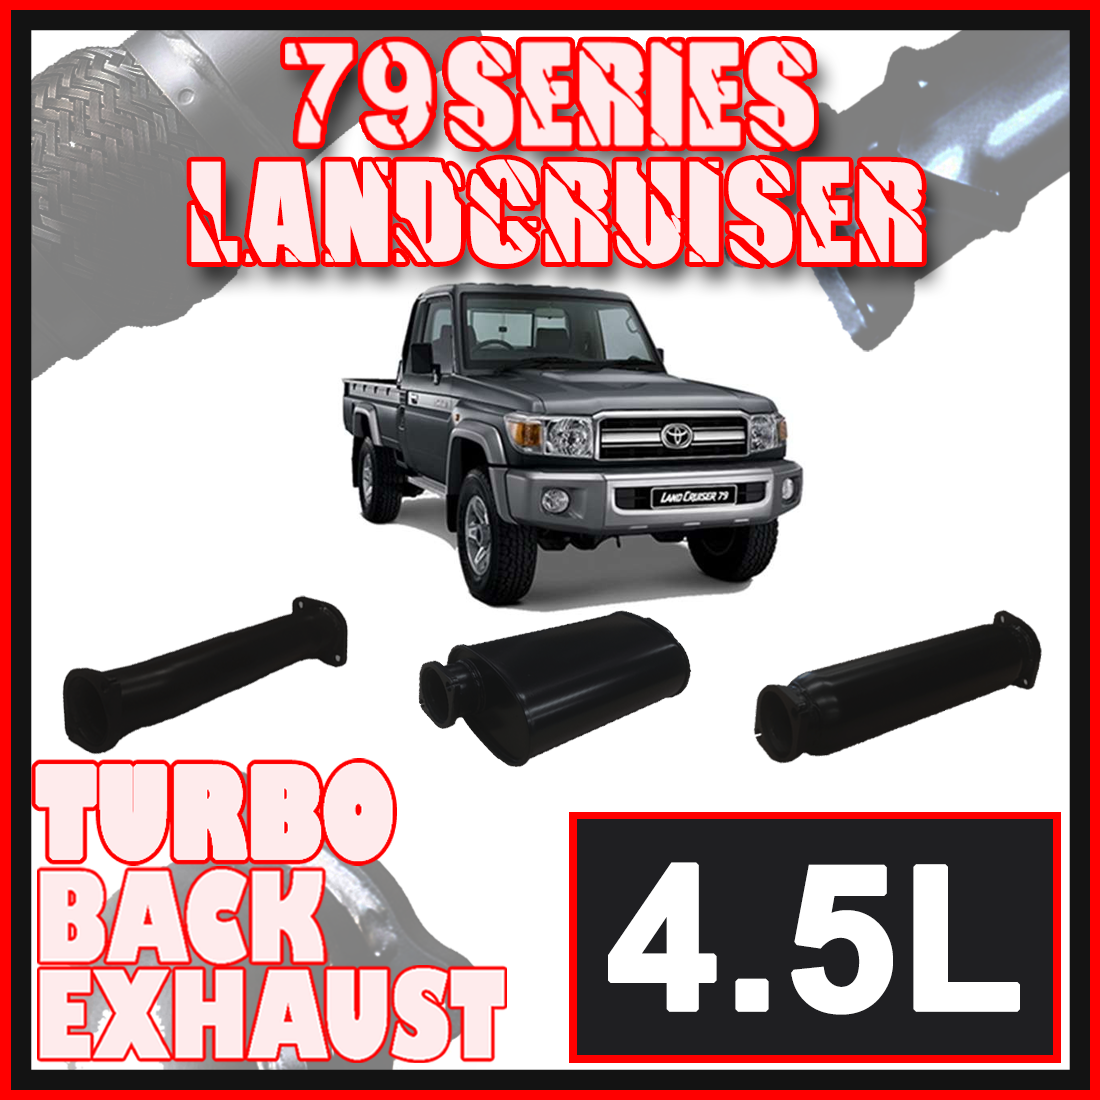 Toyota Landcruiser Exhaust 79 Series Single Cab 3" Turbo Back Systems image